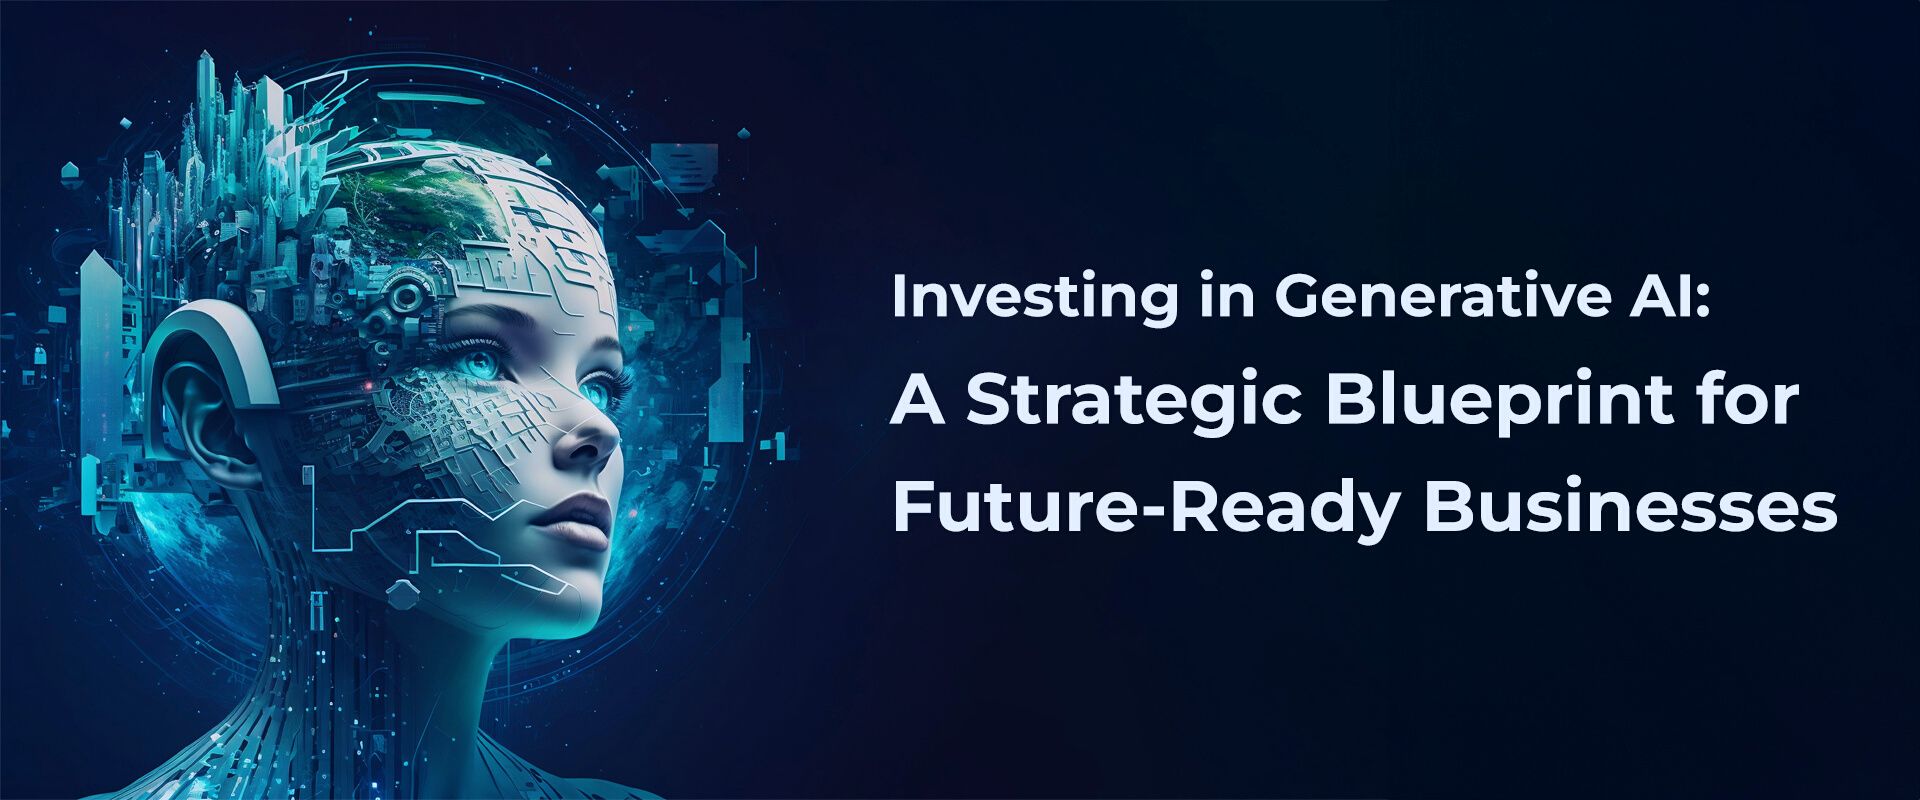 Investing in Generative AI: A Strategic Blueprint for Future-Ready Businesses